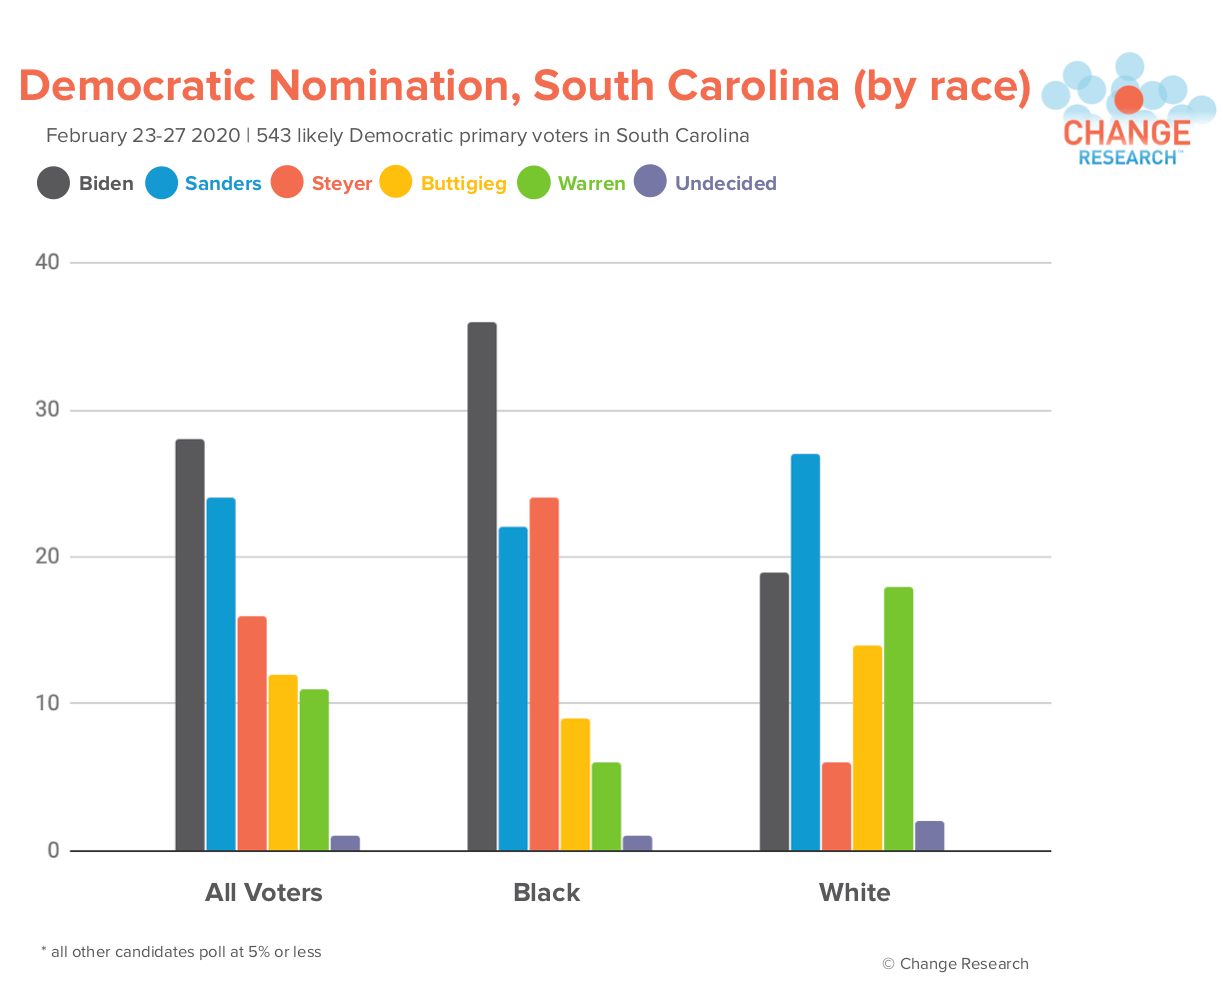 Biden Leads the Democratic Primary in South Carolina, followed by Sanders and Steyer